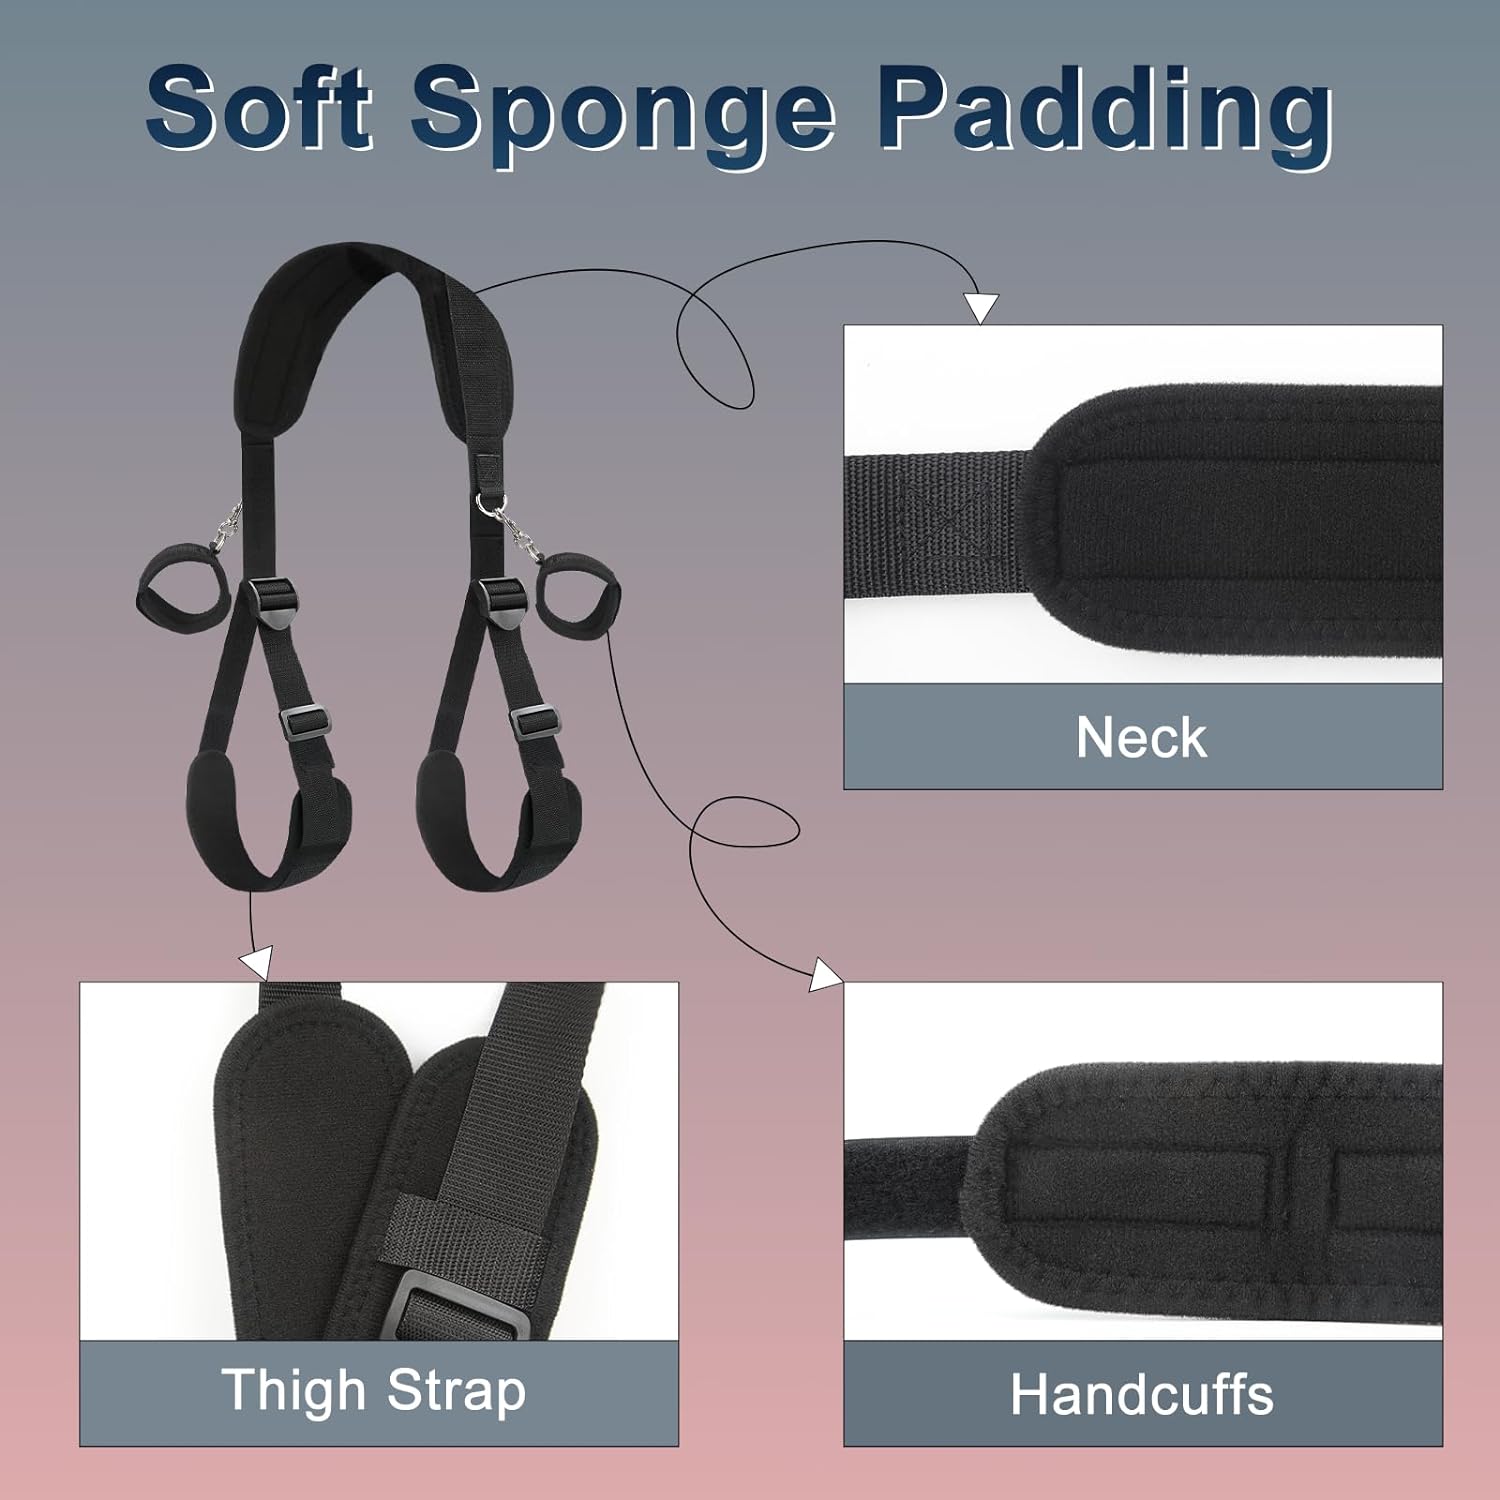 Open Wide Padded Adjustable Thigh Sling Position Aid & Demountable Handcuffs